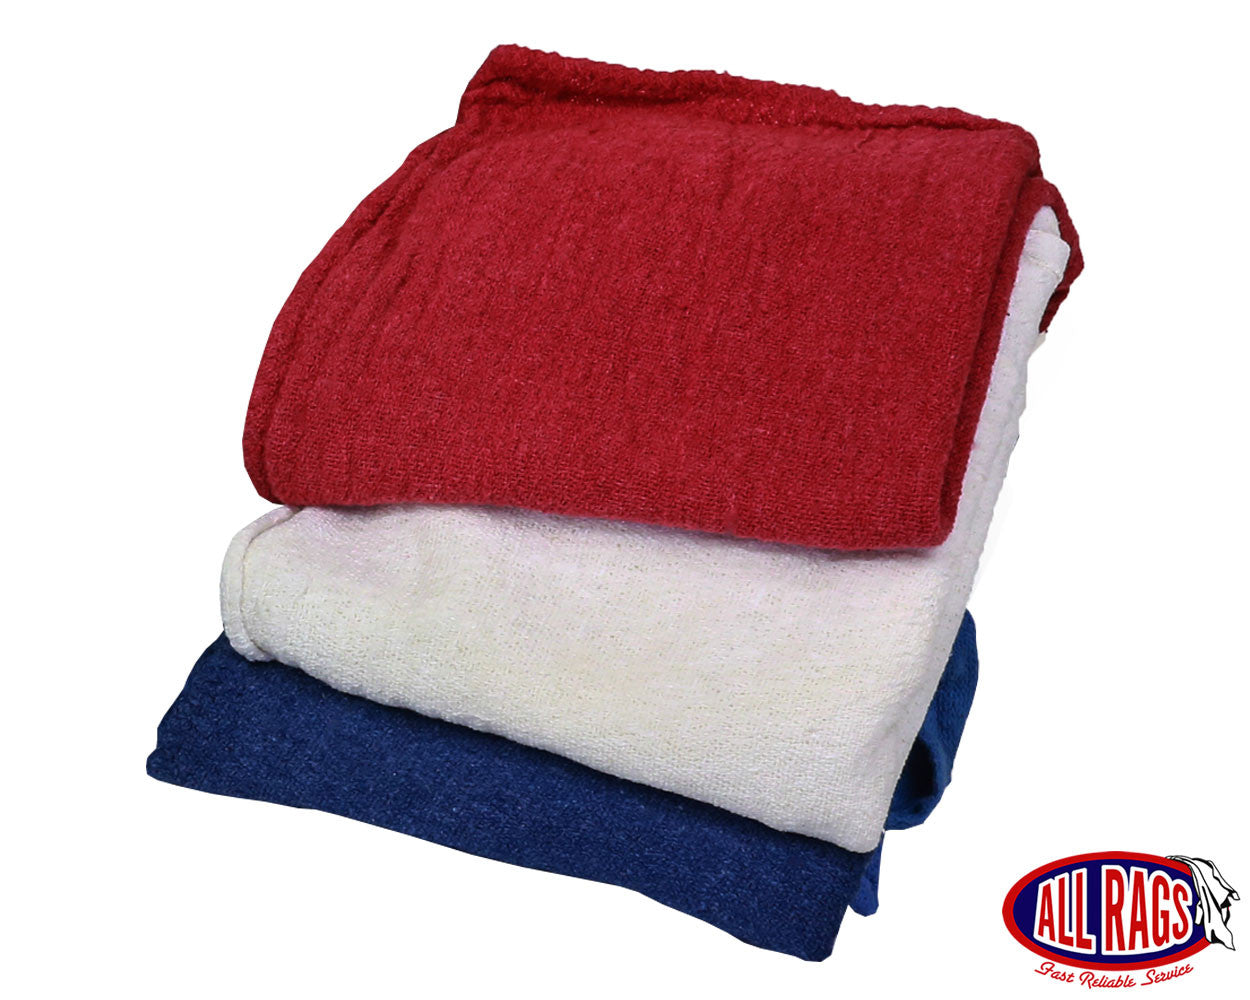 Color Terry Towel 100% Cotton Cleaning Rags - 10 lbs. Bag - Multipurpo